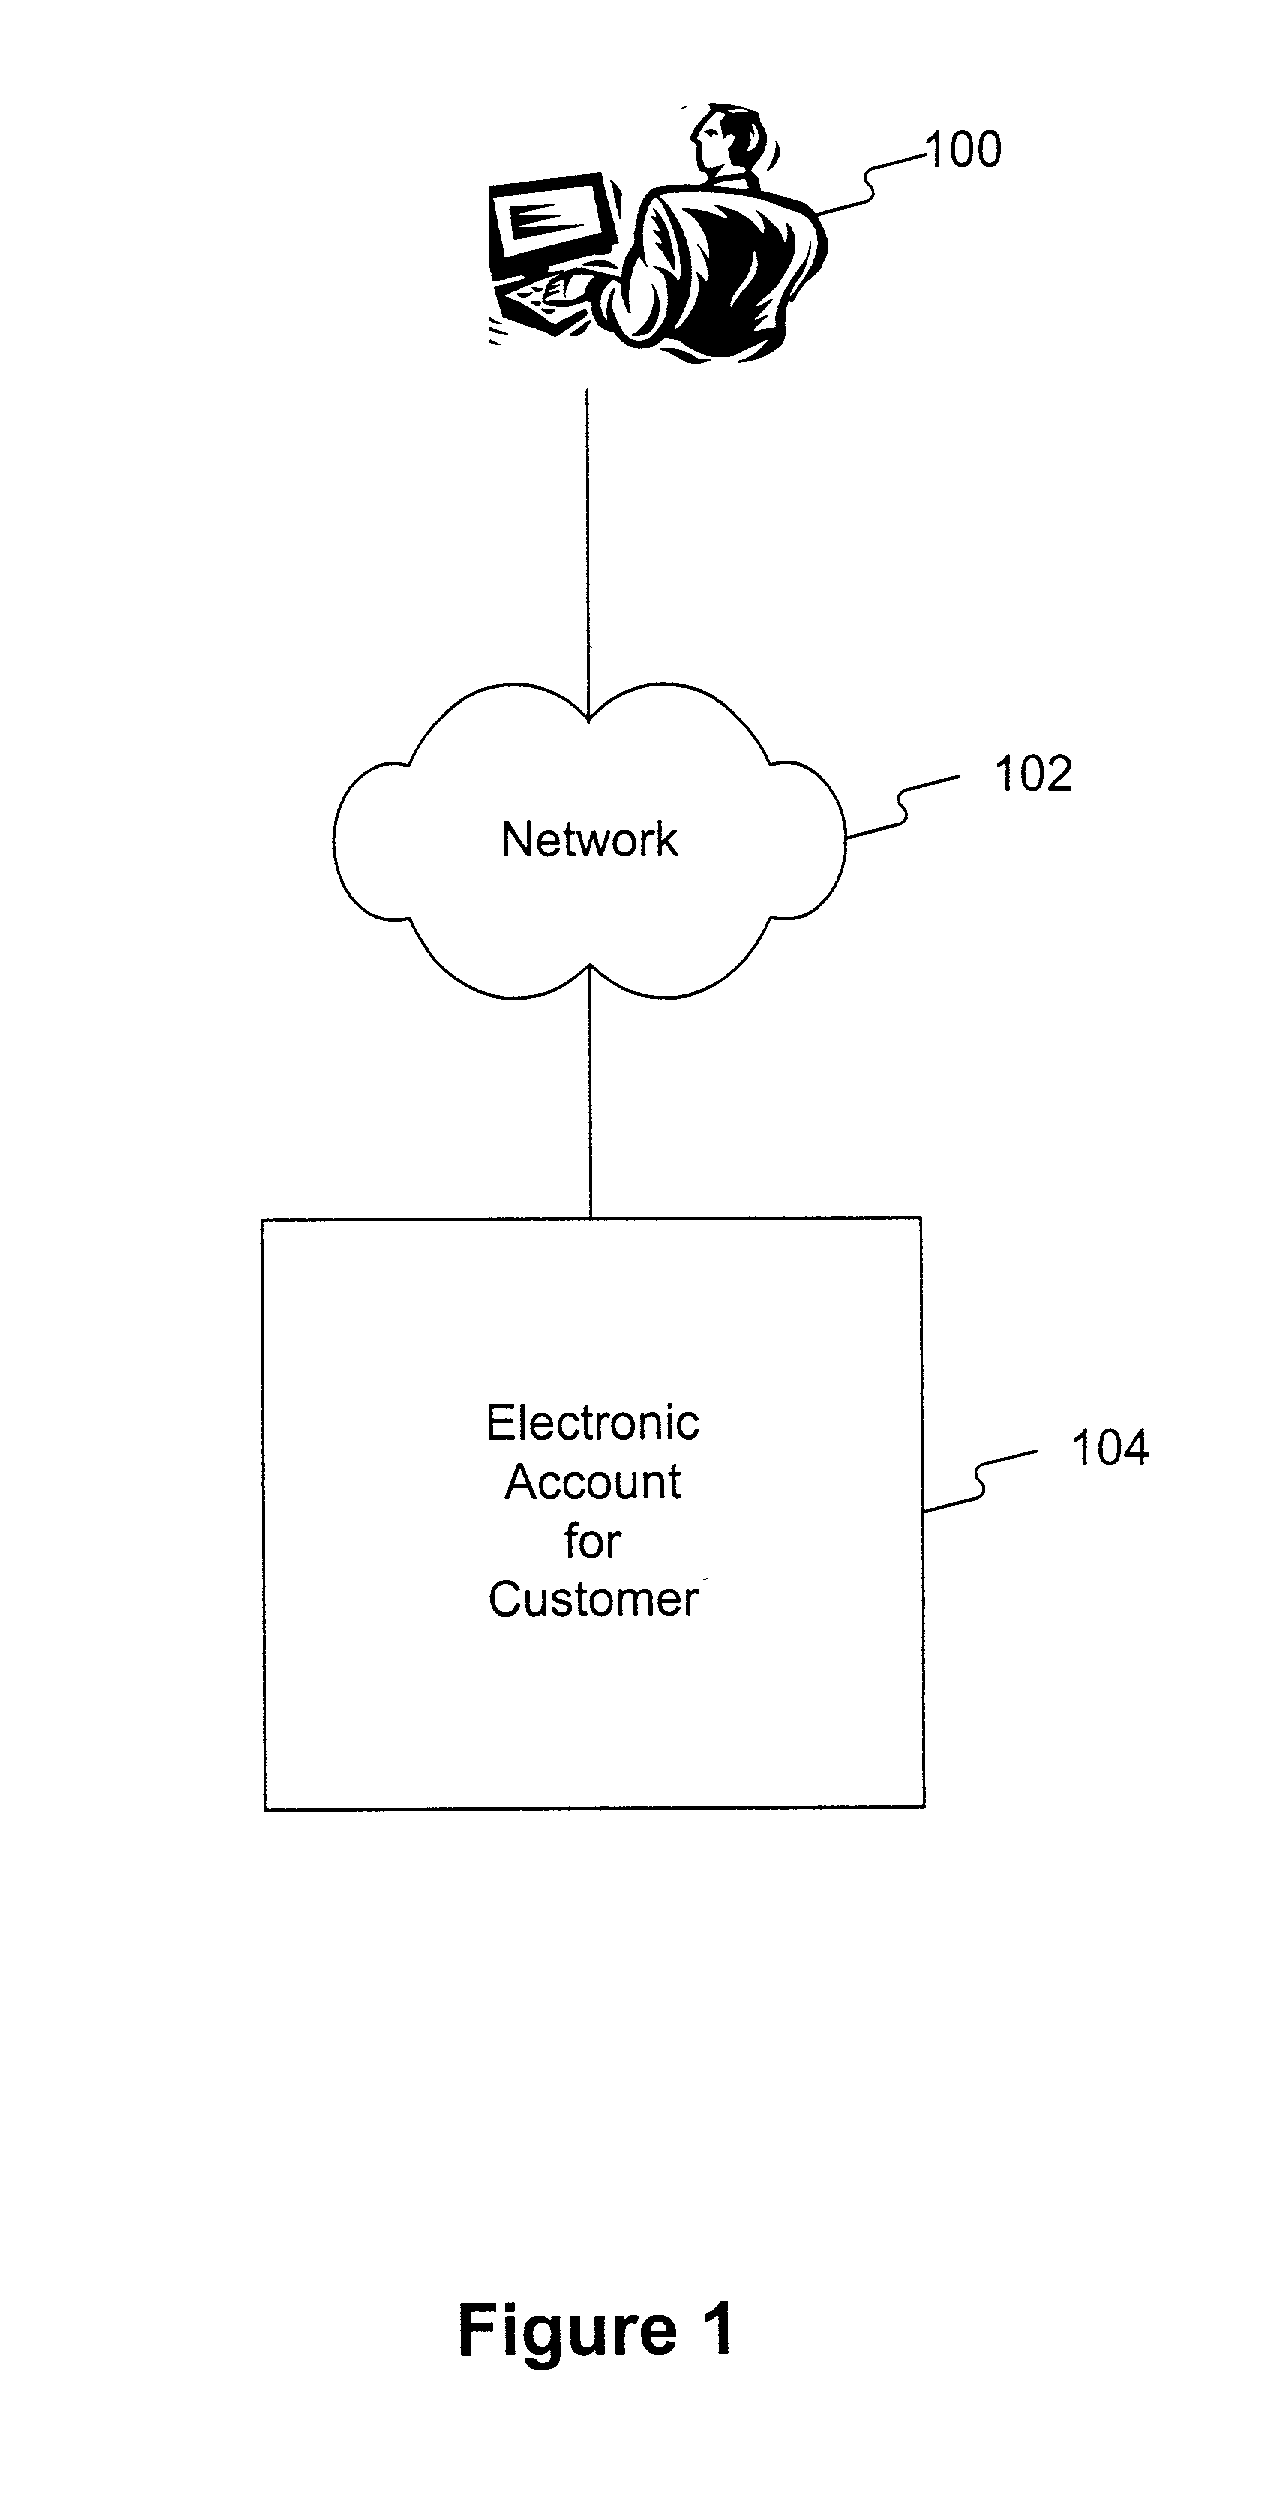 Methods and systems for linking an electronic address to a physical address of a customer